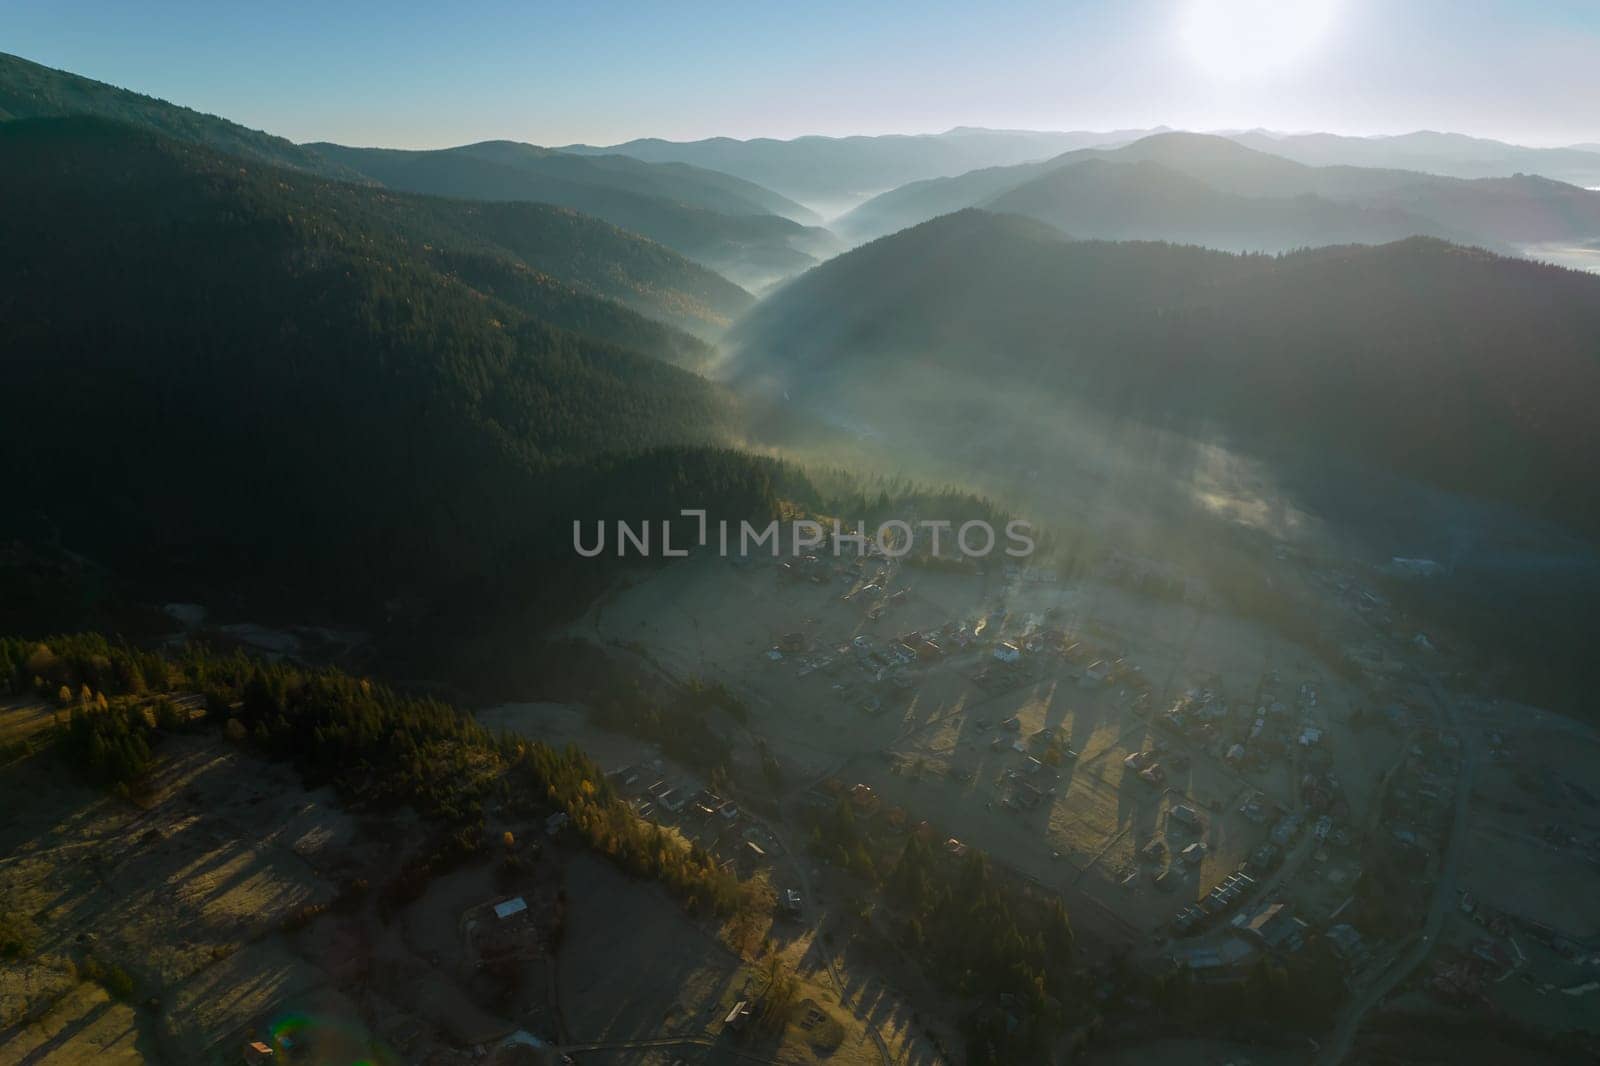 Juxtaposition of mist and mountains transformed ordinary forest into scene of extraordinary beauty. by Yaroslav